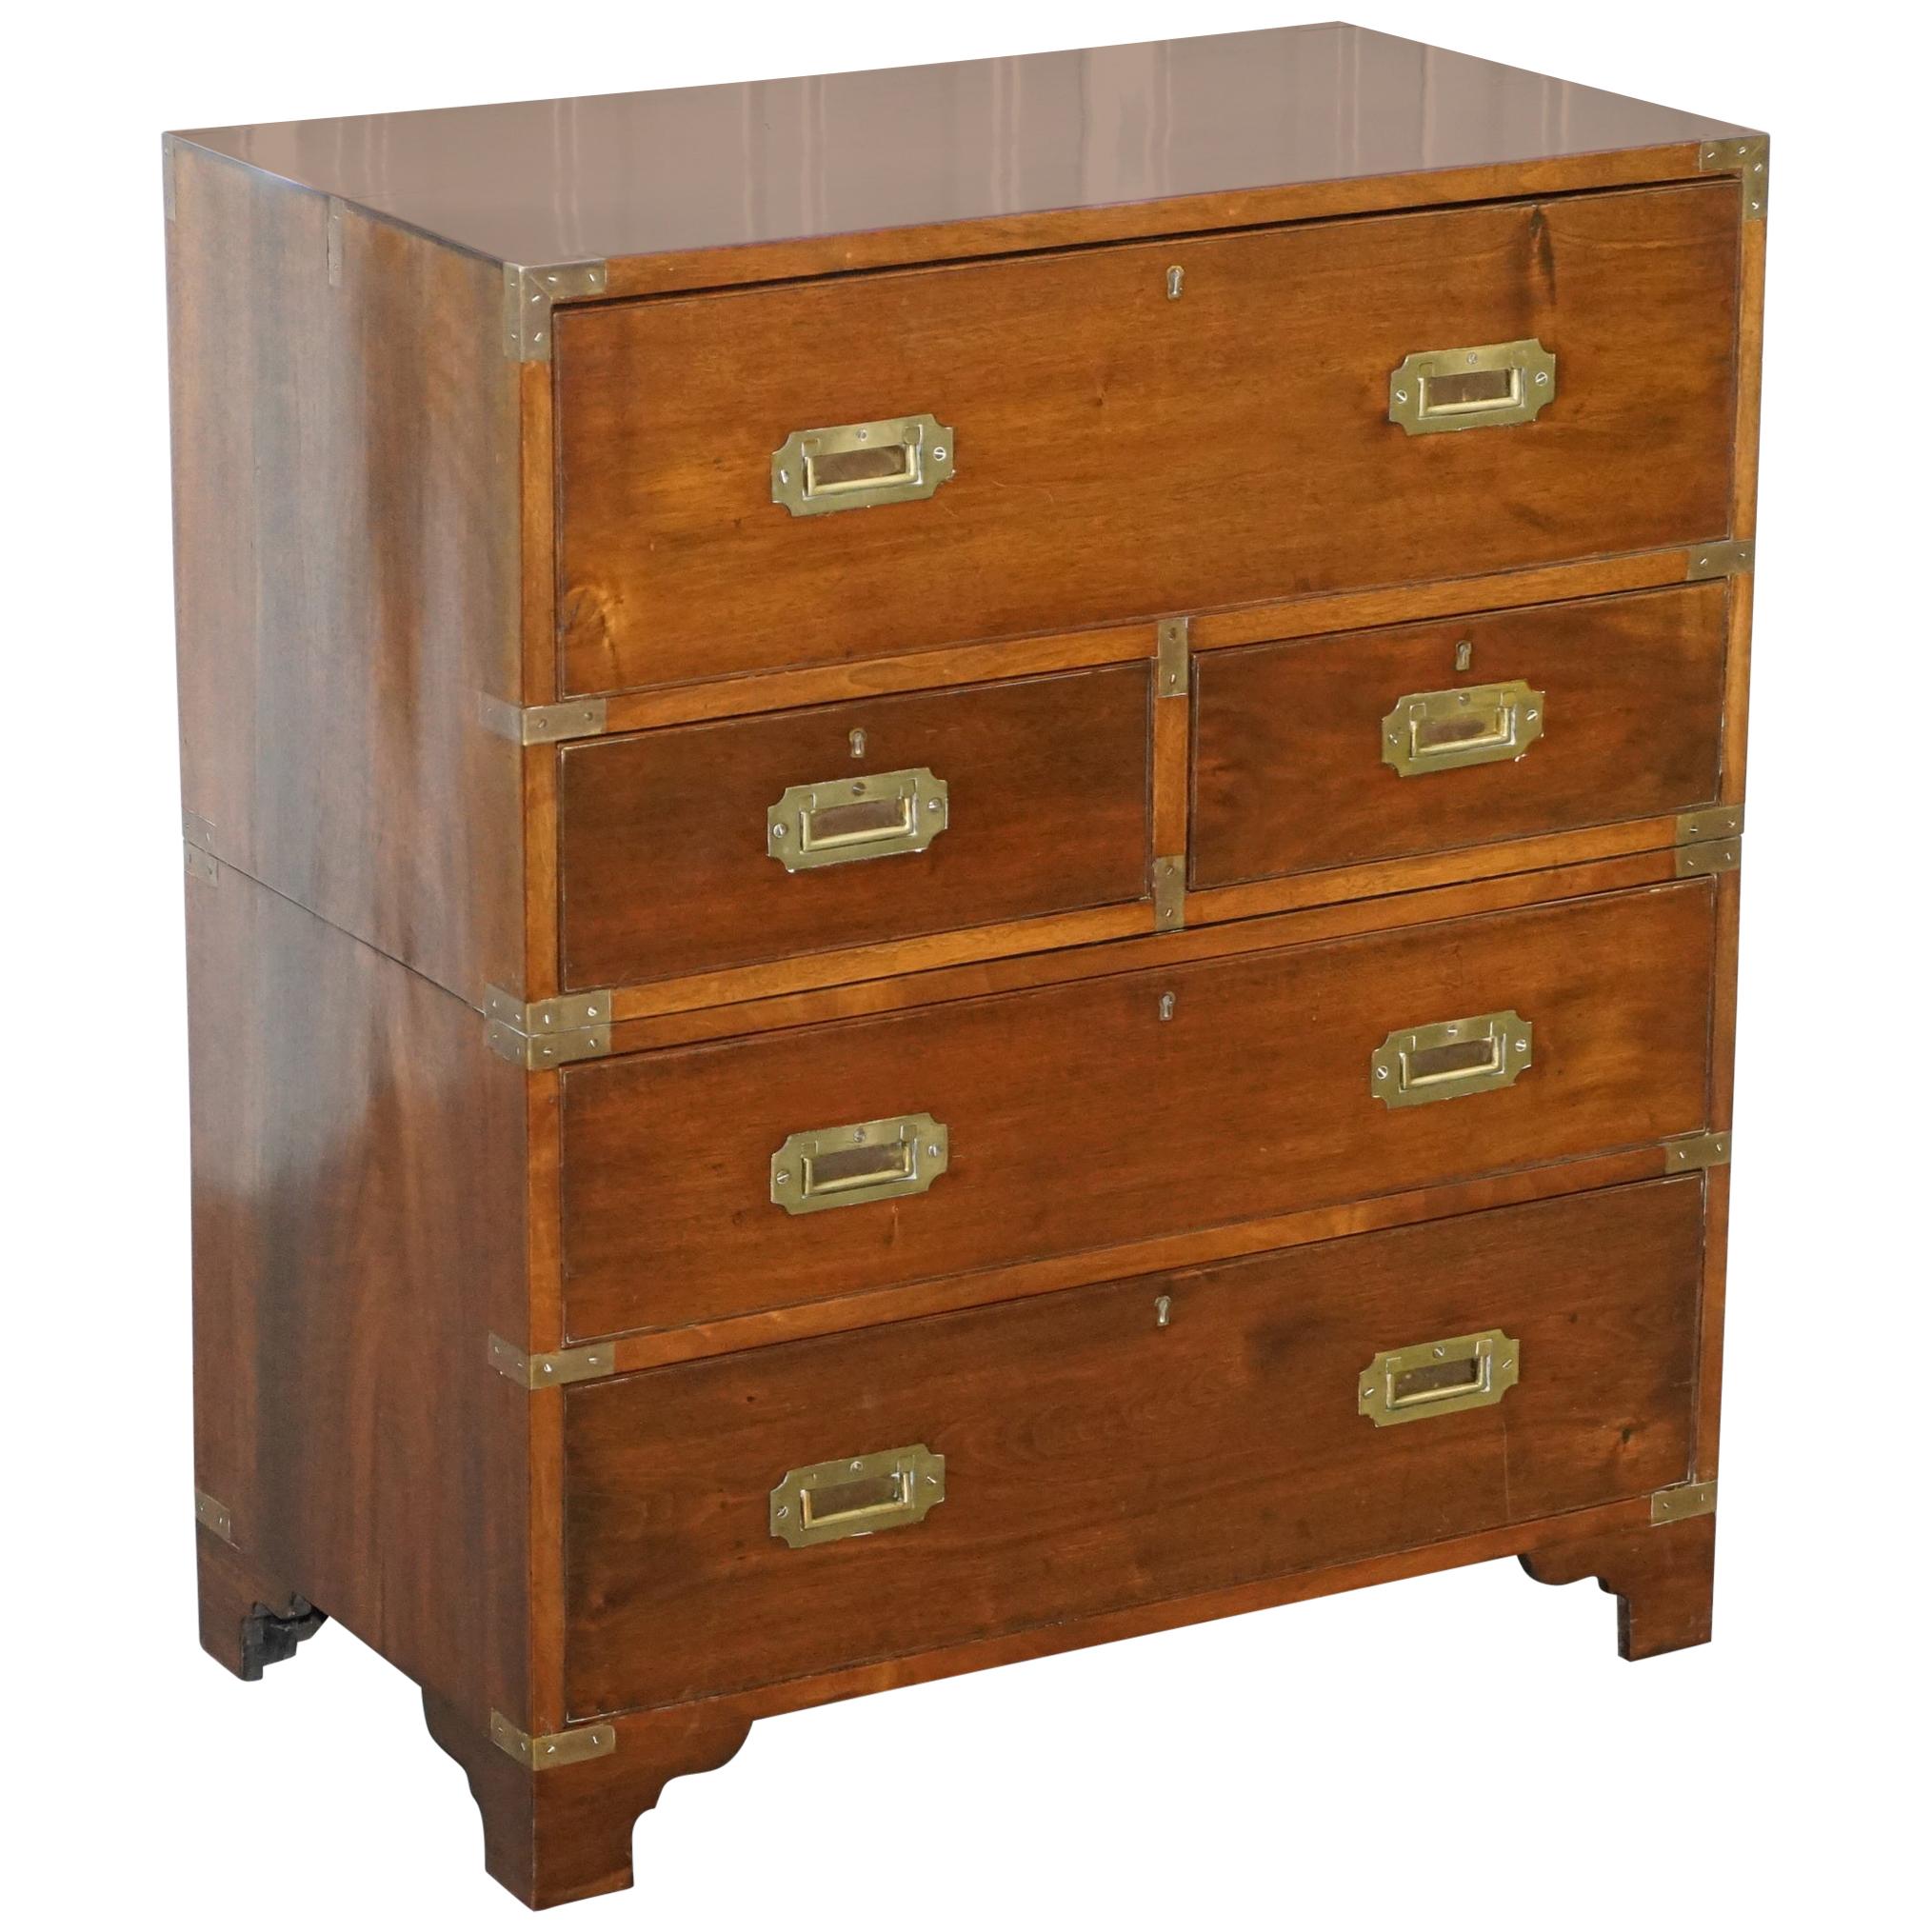 Victorian Military Campaign Chest of Drawers Built in Secrataire Drop Front Desk